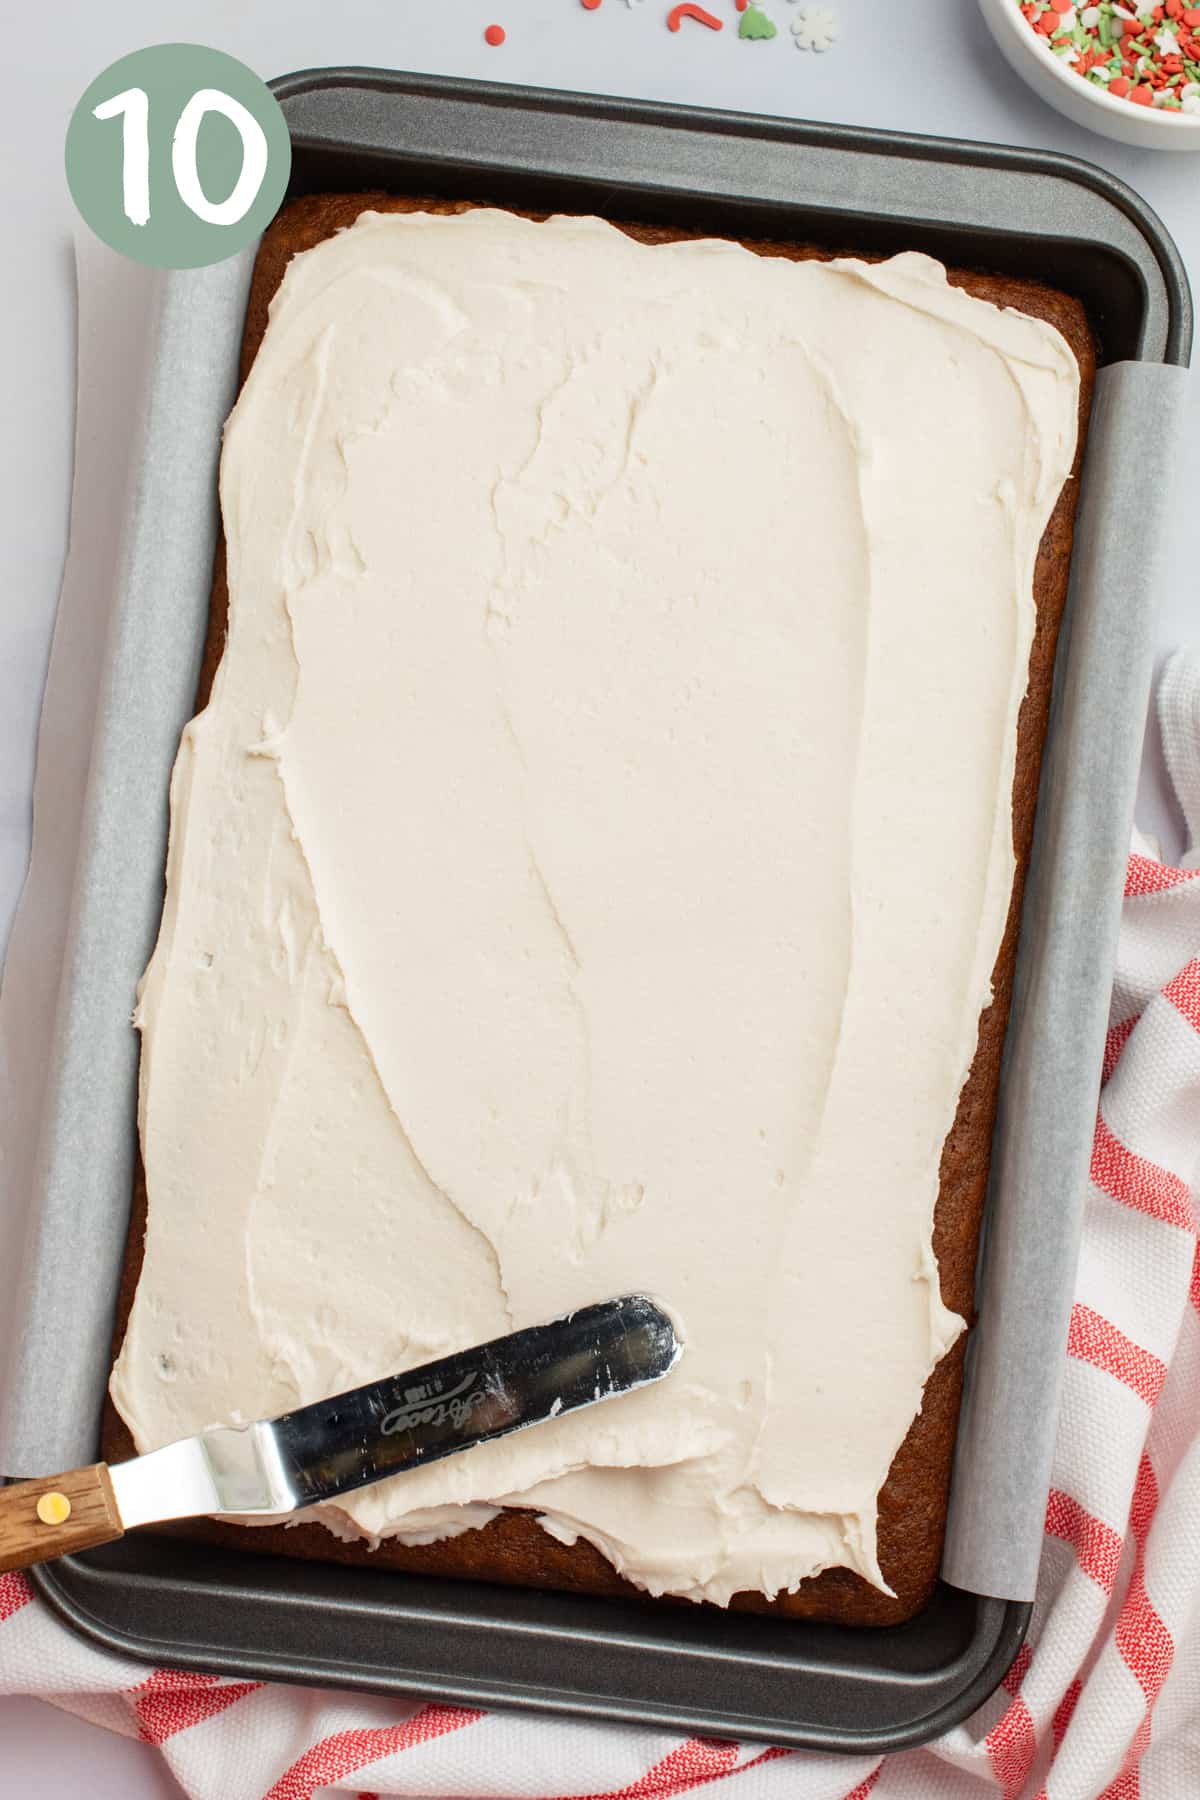 Frosting being spread across a cake with a spatula.